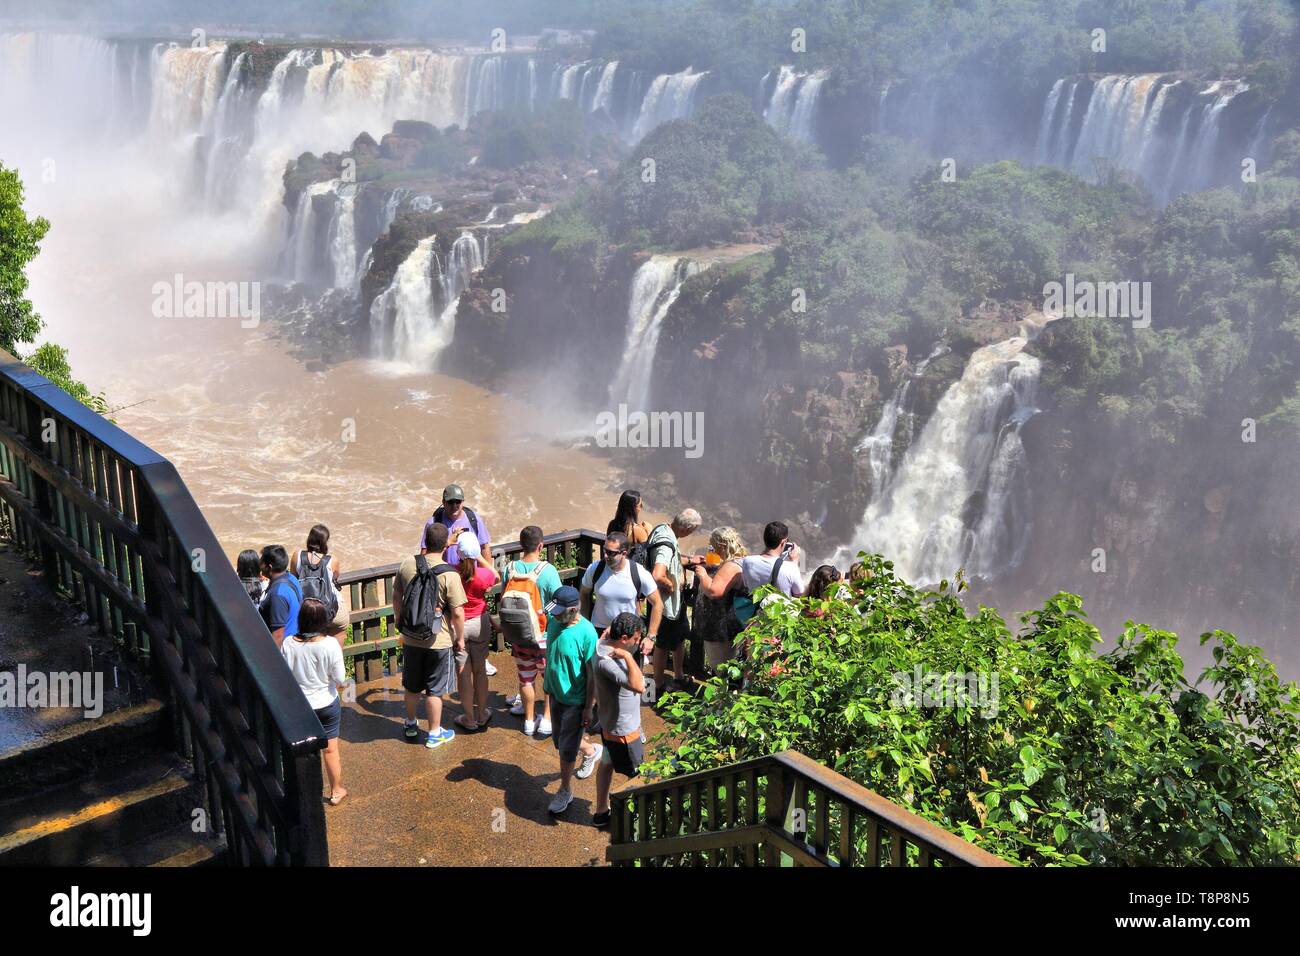 IGUACU NATIONAL PARK, BRAZIL - OCTOBER 9, 2014: People visit Iguacu National Park in Brazil. The park was established in 1939 and is a UNESCO World He Stock Photo